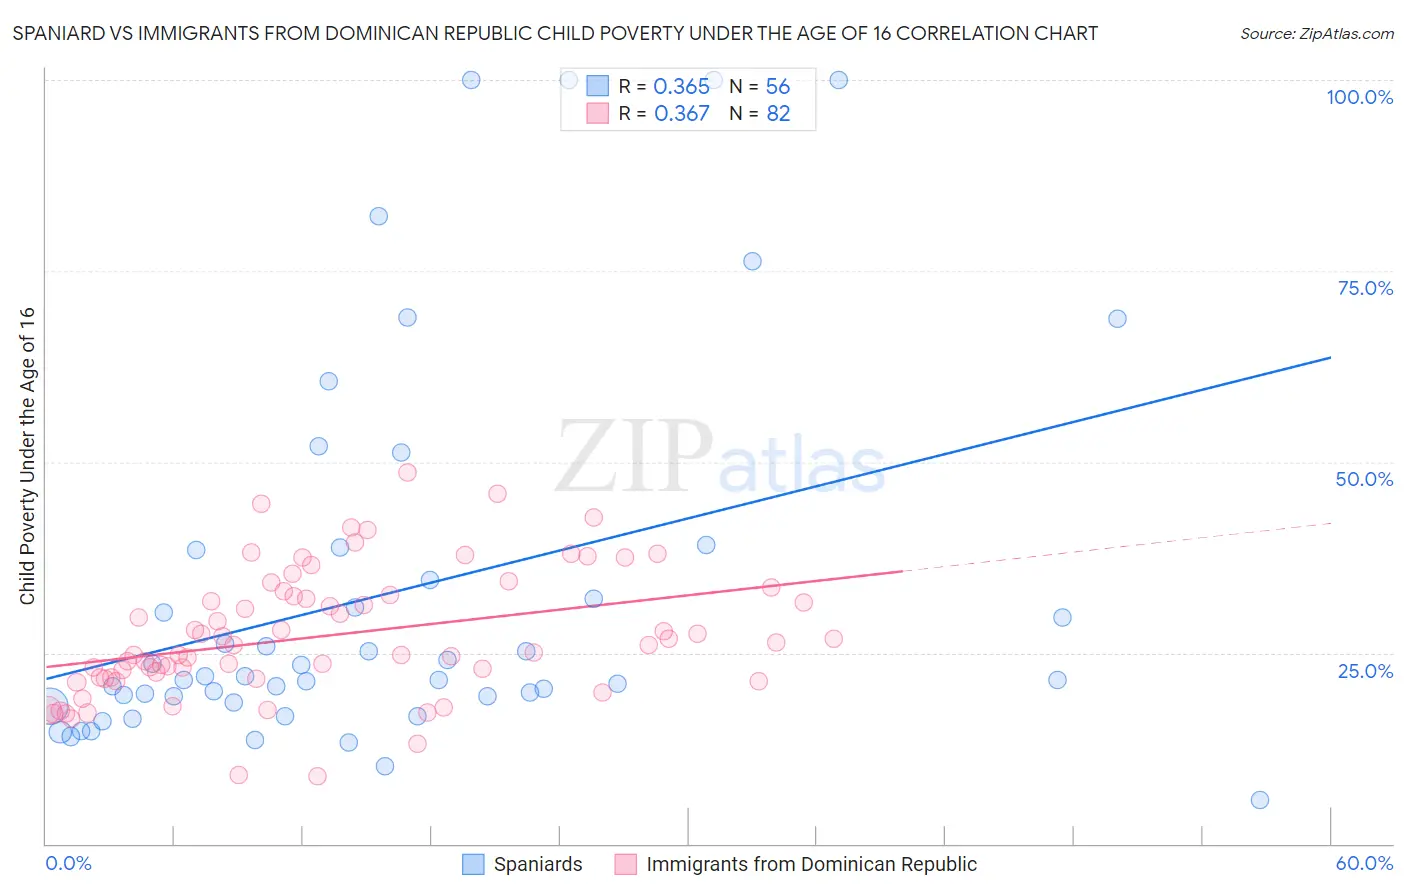 Spaniard vs Immigrants from Dominican Republic Child Poverty Under the Age of 16